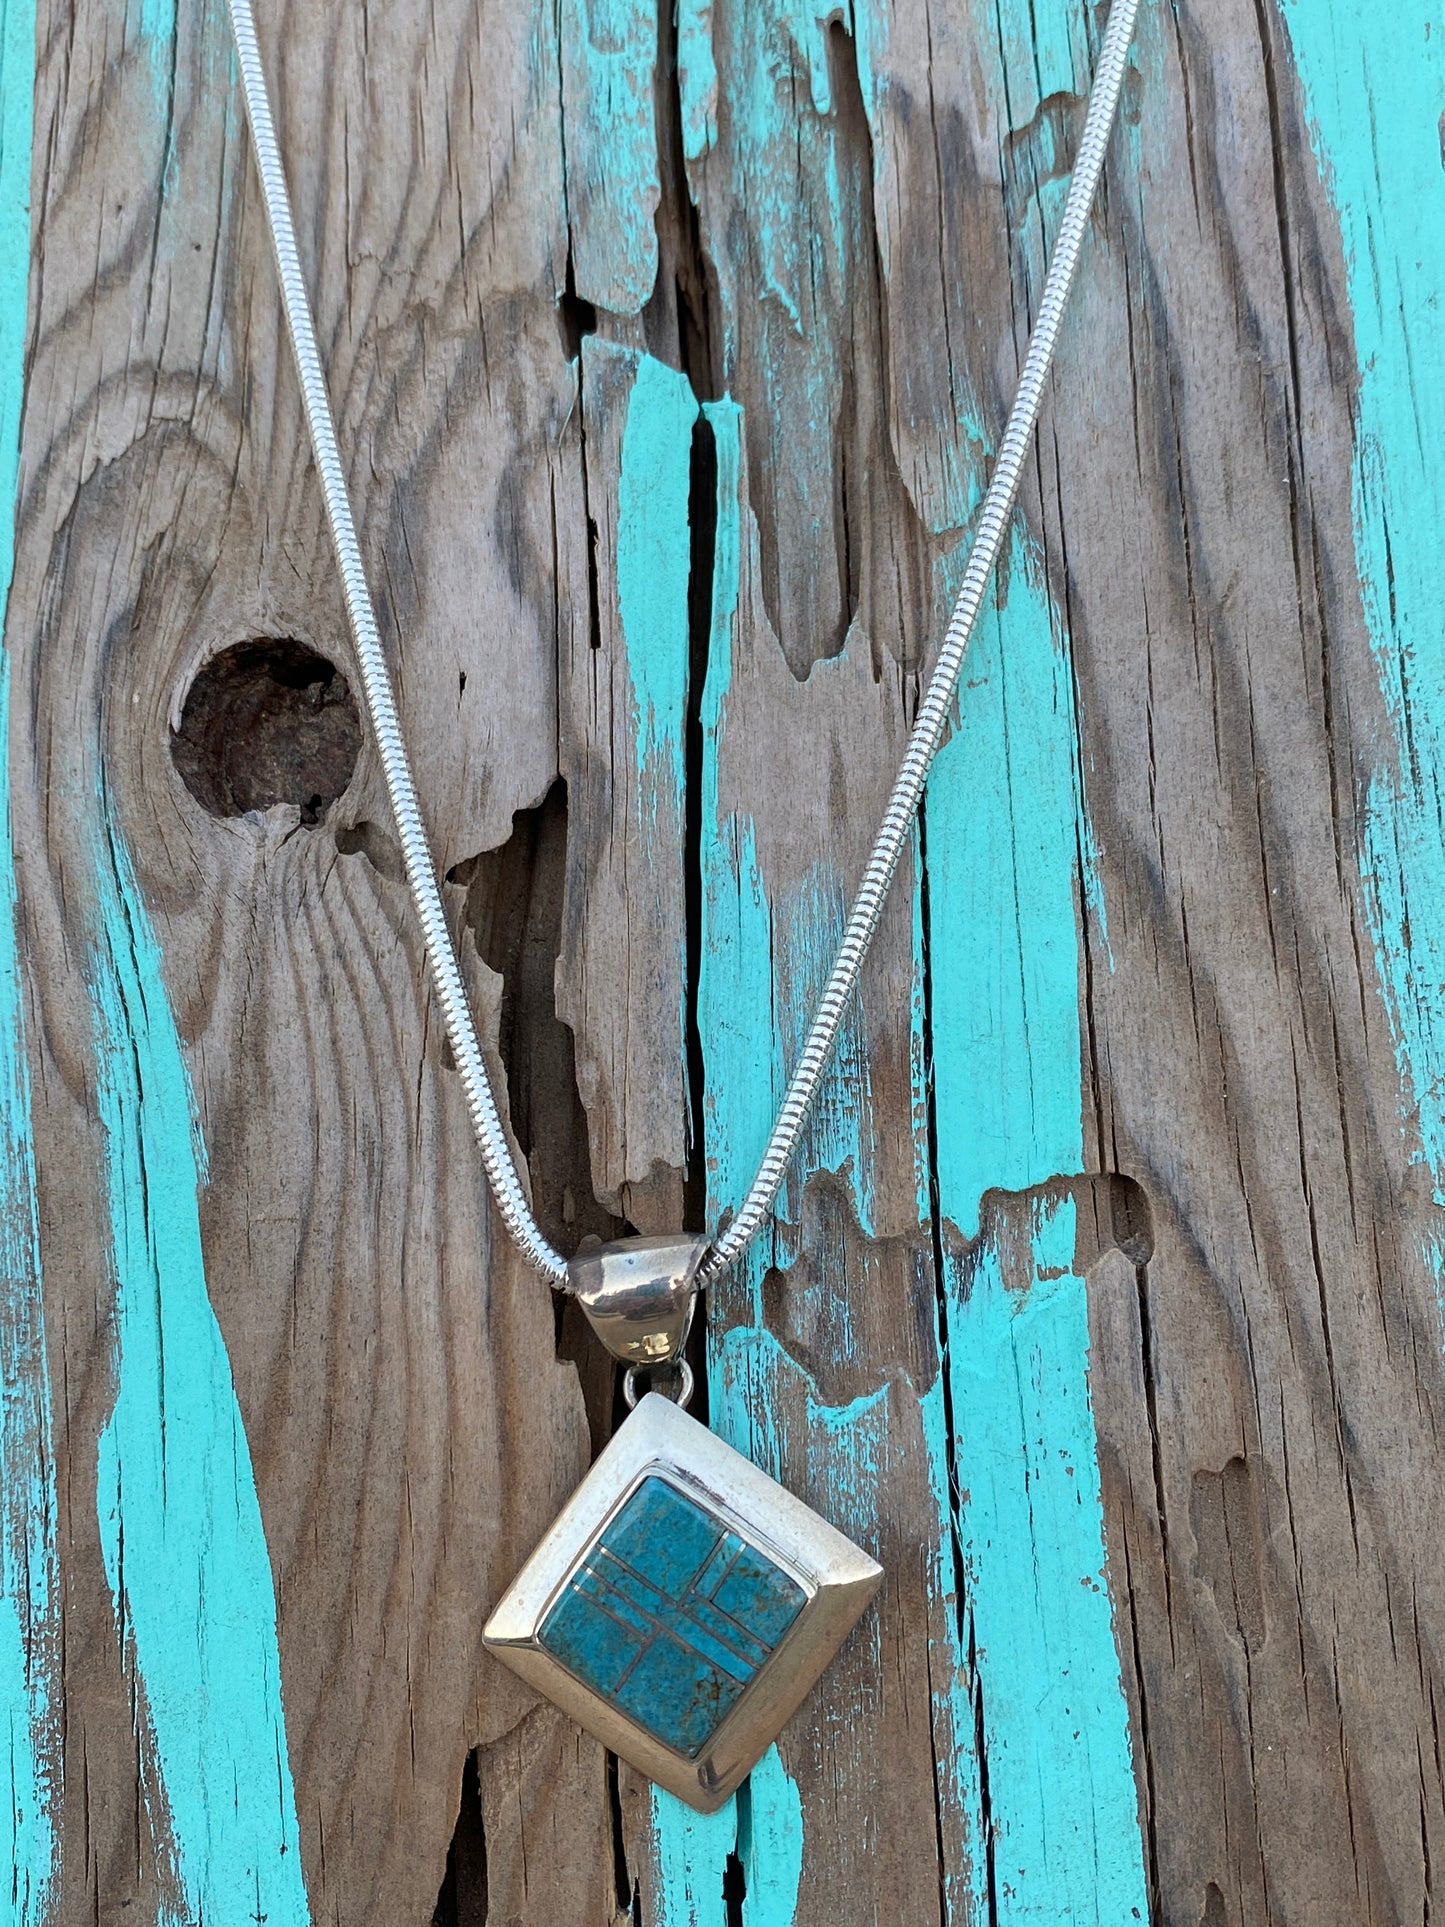 Turquoise Sterling Silver Square Pendant